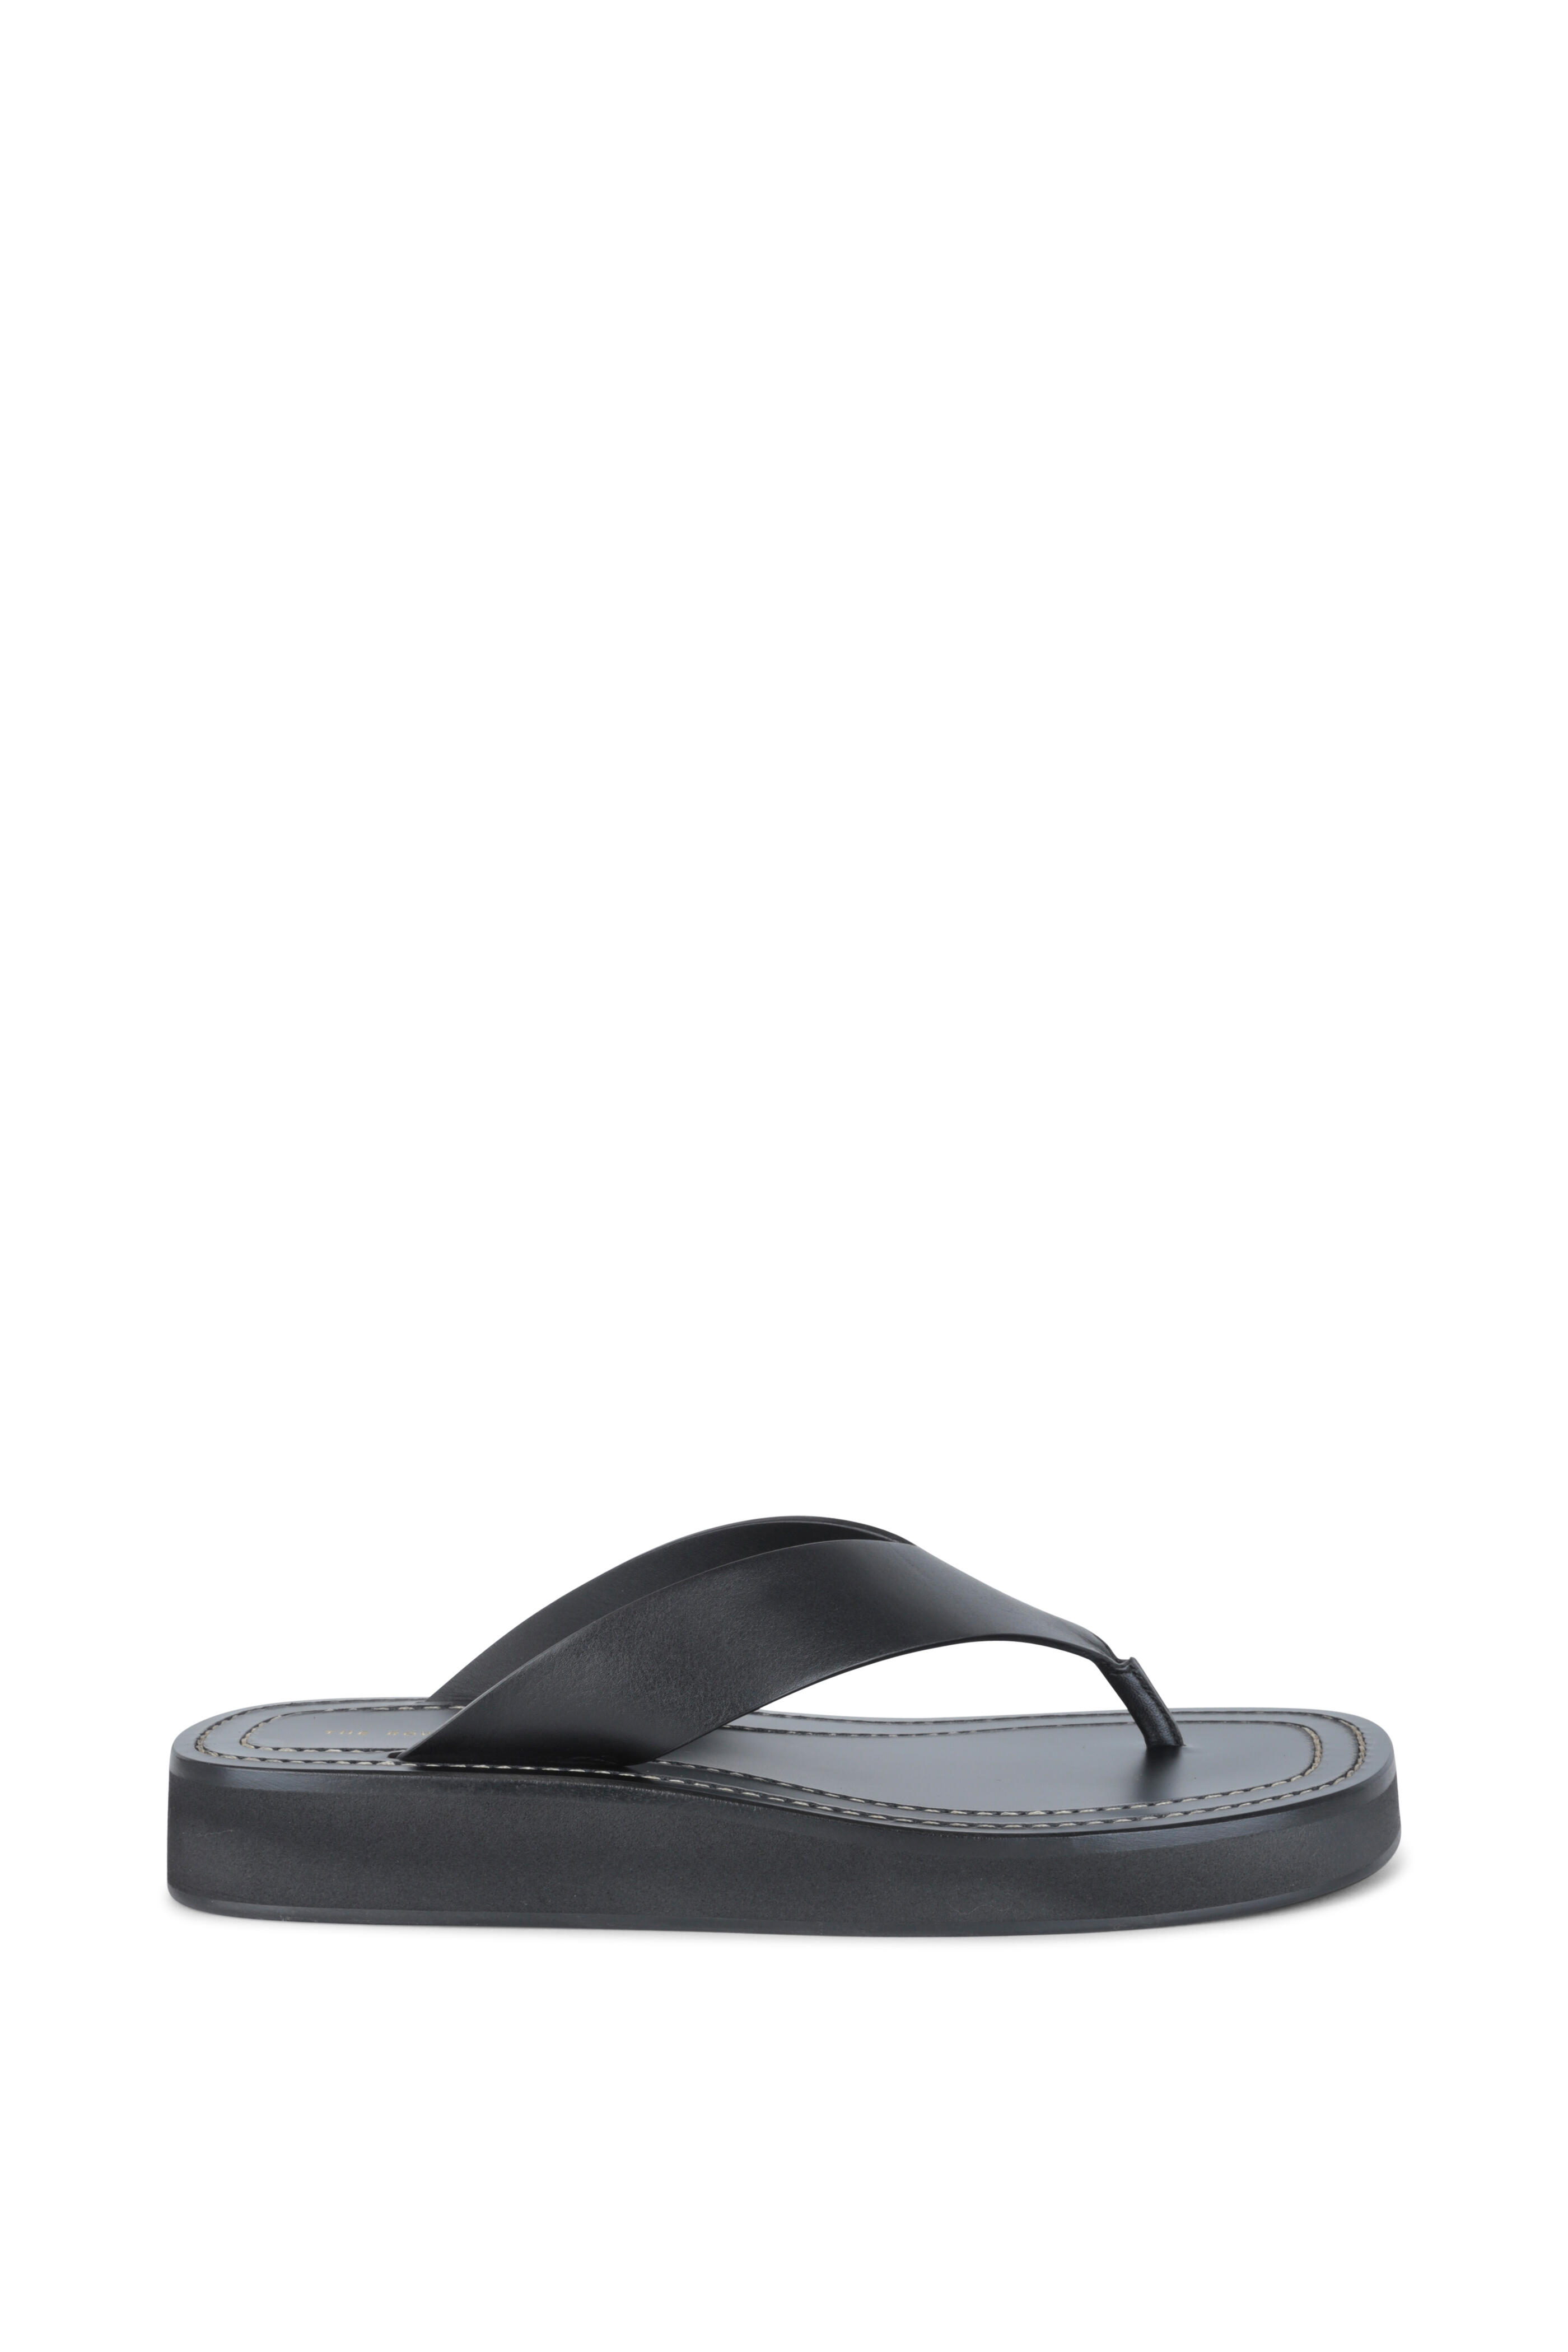 Leather thong sandals in black - The Row